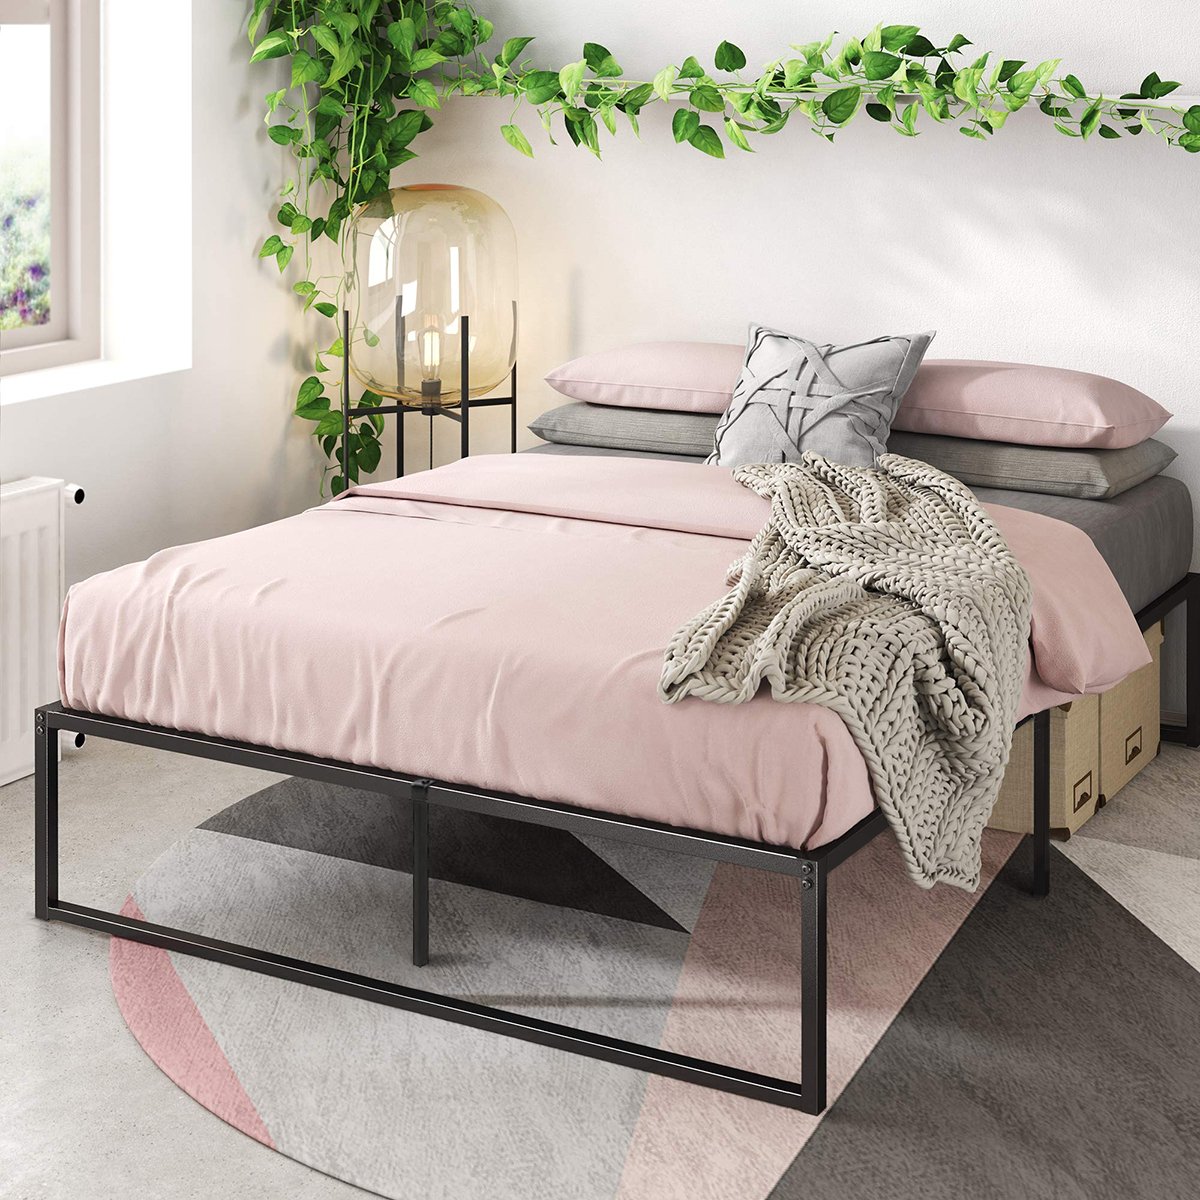 14/16.5"  Platform Bed Frame, Twin/Full/Queen/King Size ...